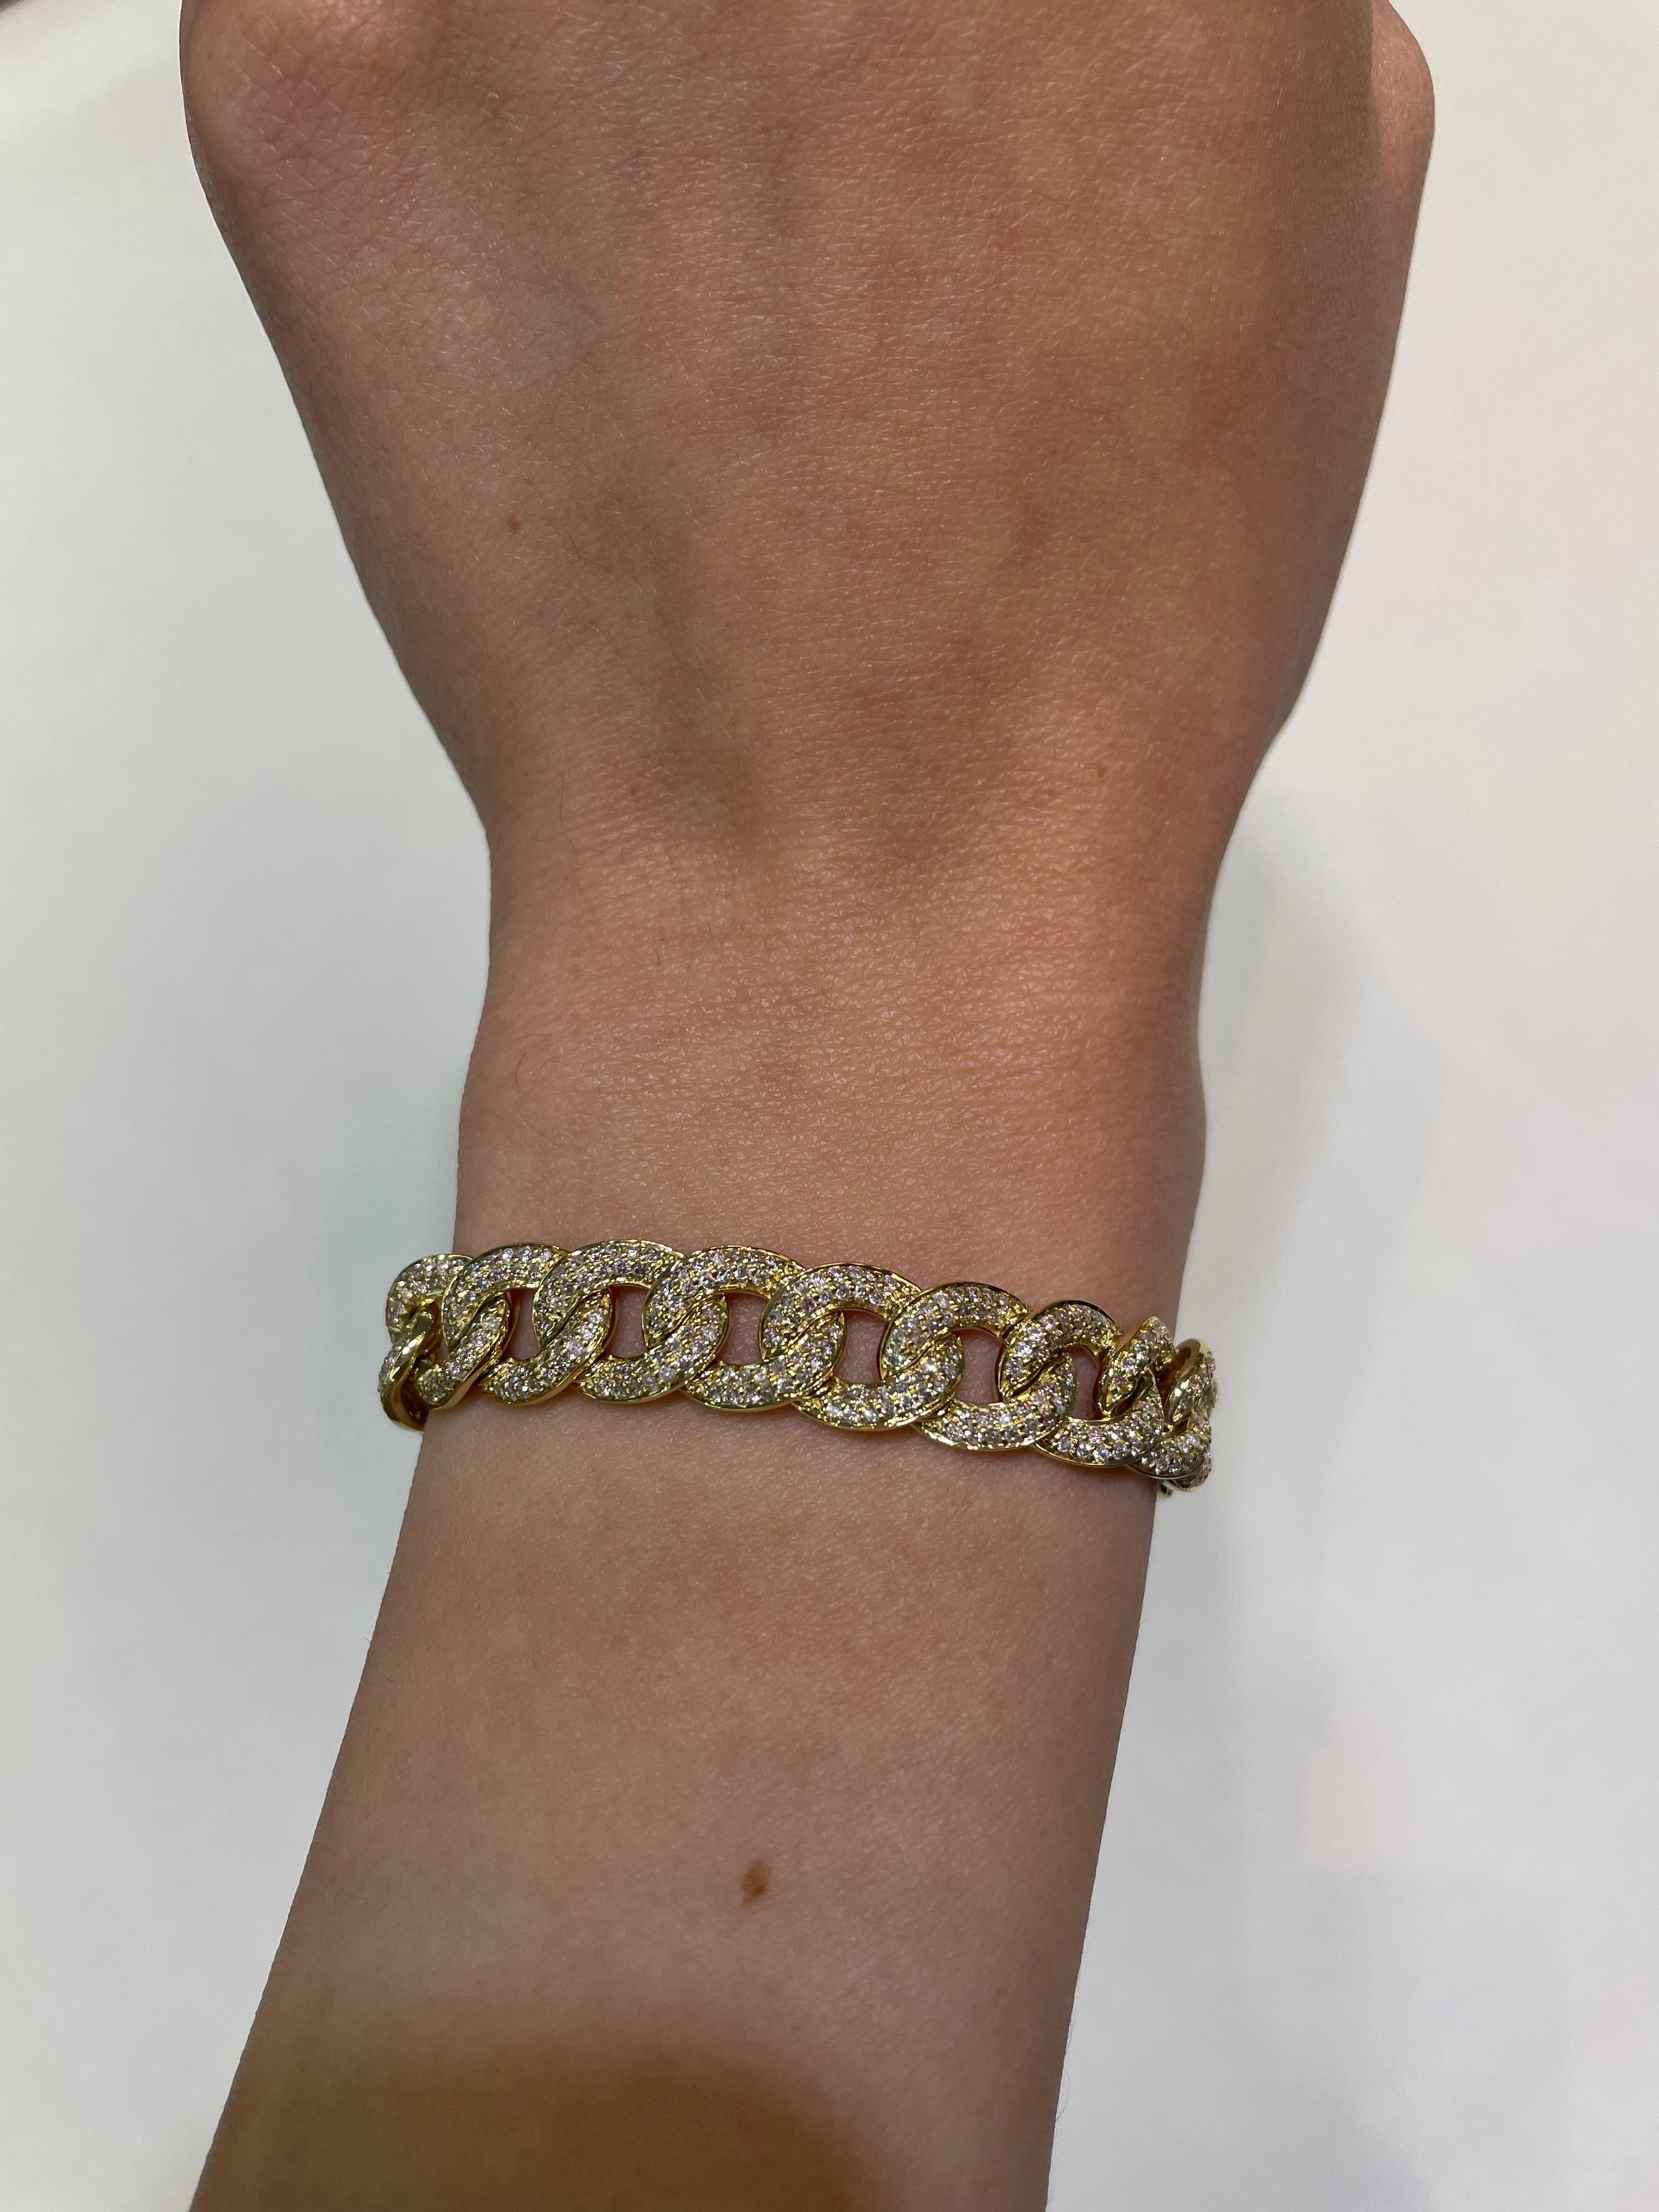 Modern diamond cuban link bracelet.
752 round brilliant diamonds, 4.80 carats total. Approximately G/H color and SI clarity. 18k yellow gold, 26.67 grams, 7 inches.
Accommodated with an up-to-date appraisal by a GIA G.G. once purchased, upon